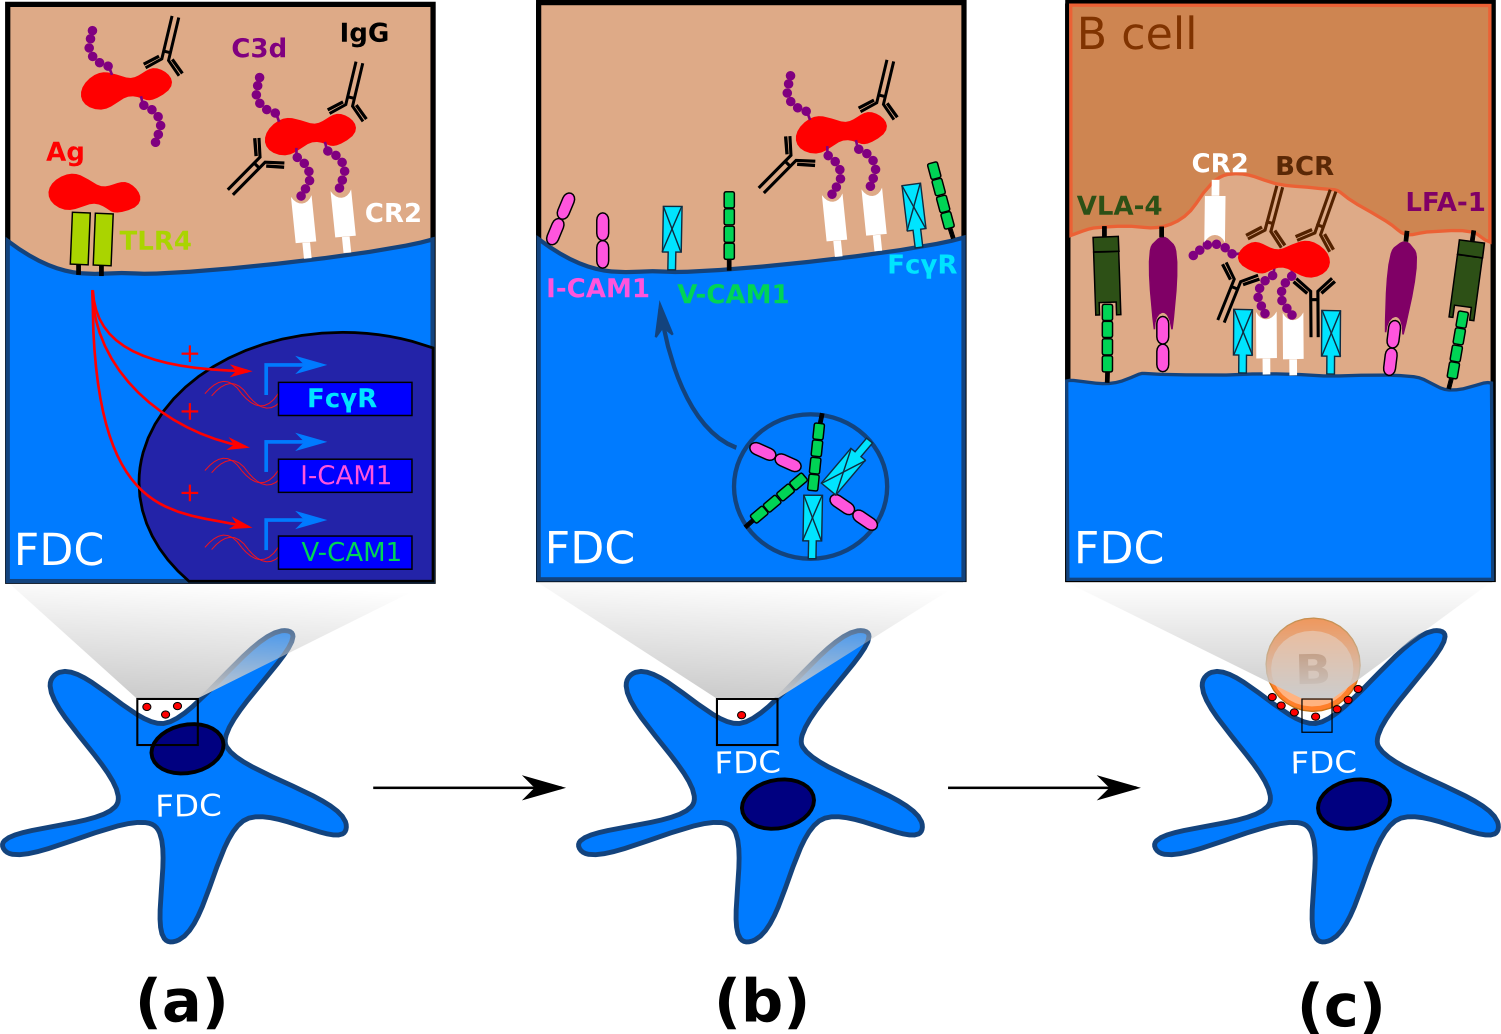 FDC maturation and processing of antigen.